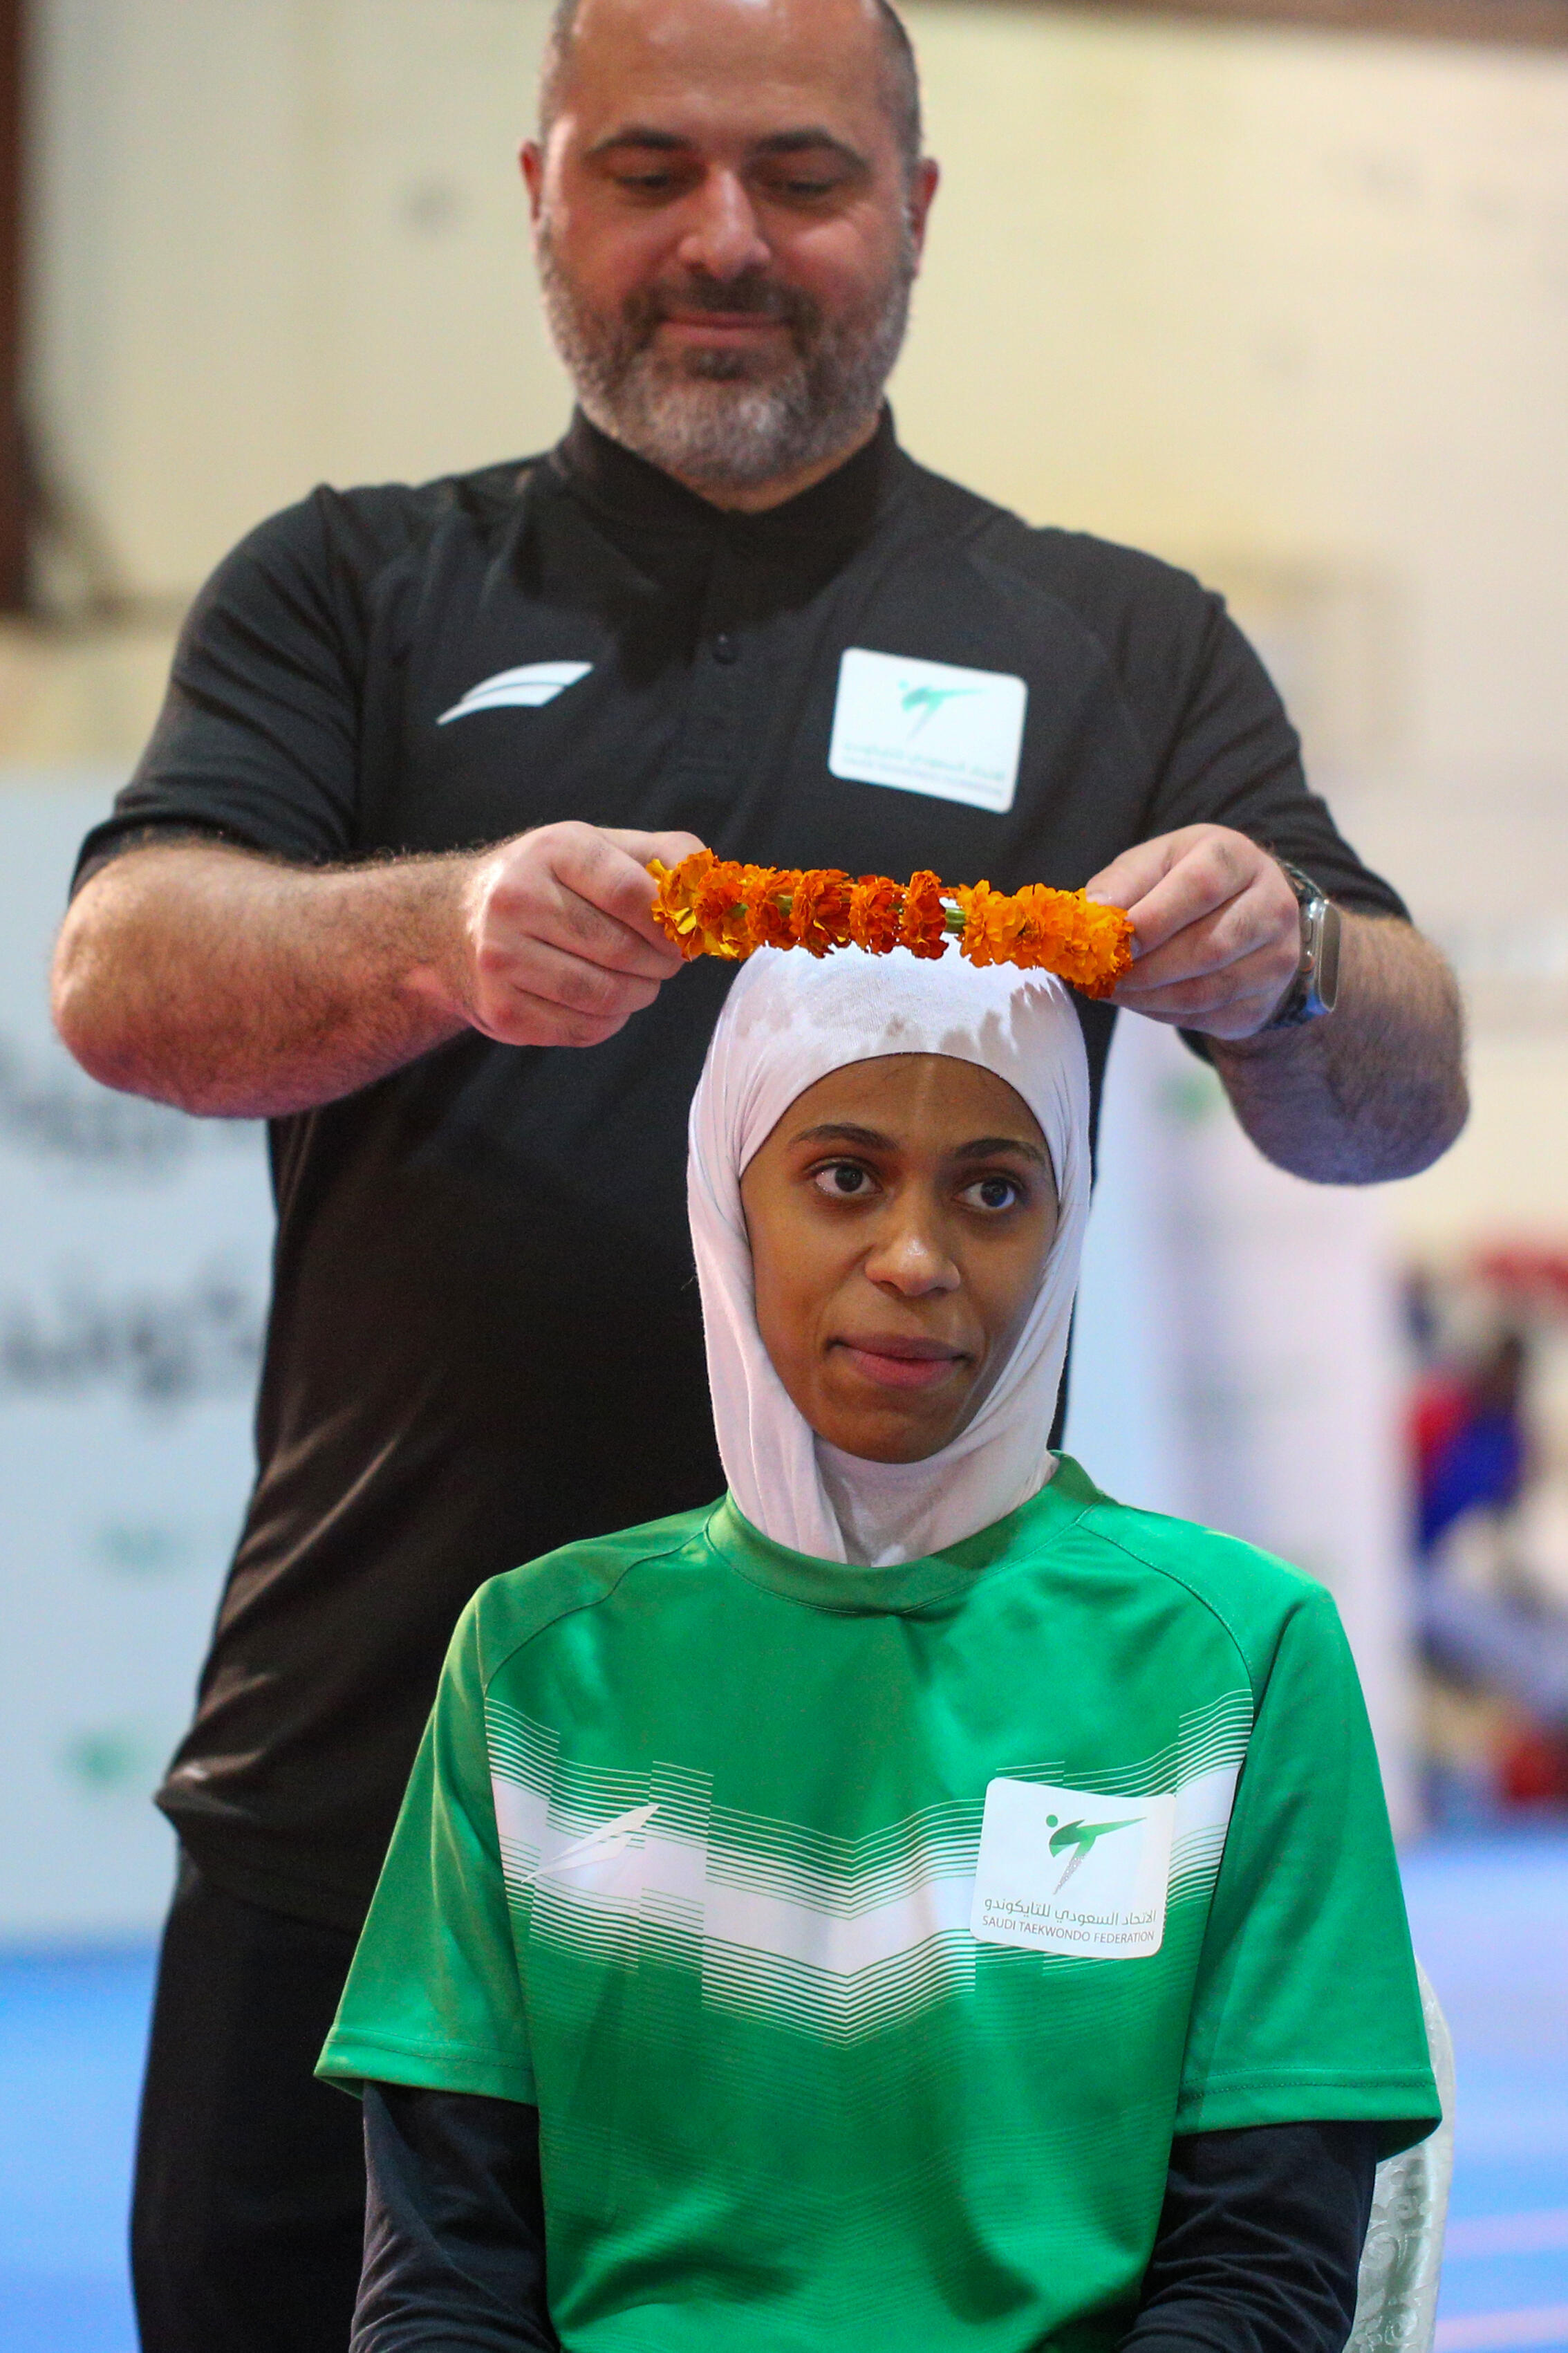 Russian Kurban Bugdaev, coach of the Saudi Olympic taekwondo team, places a laurel wreath on the head of Donia Abu Taleb, who hopes to win a gold medal at the Paris Games, on June 9, 2024 in Abha